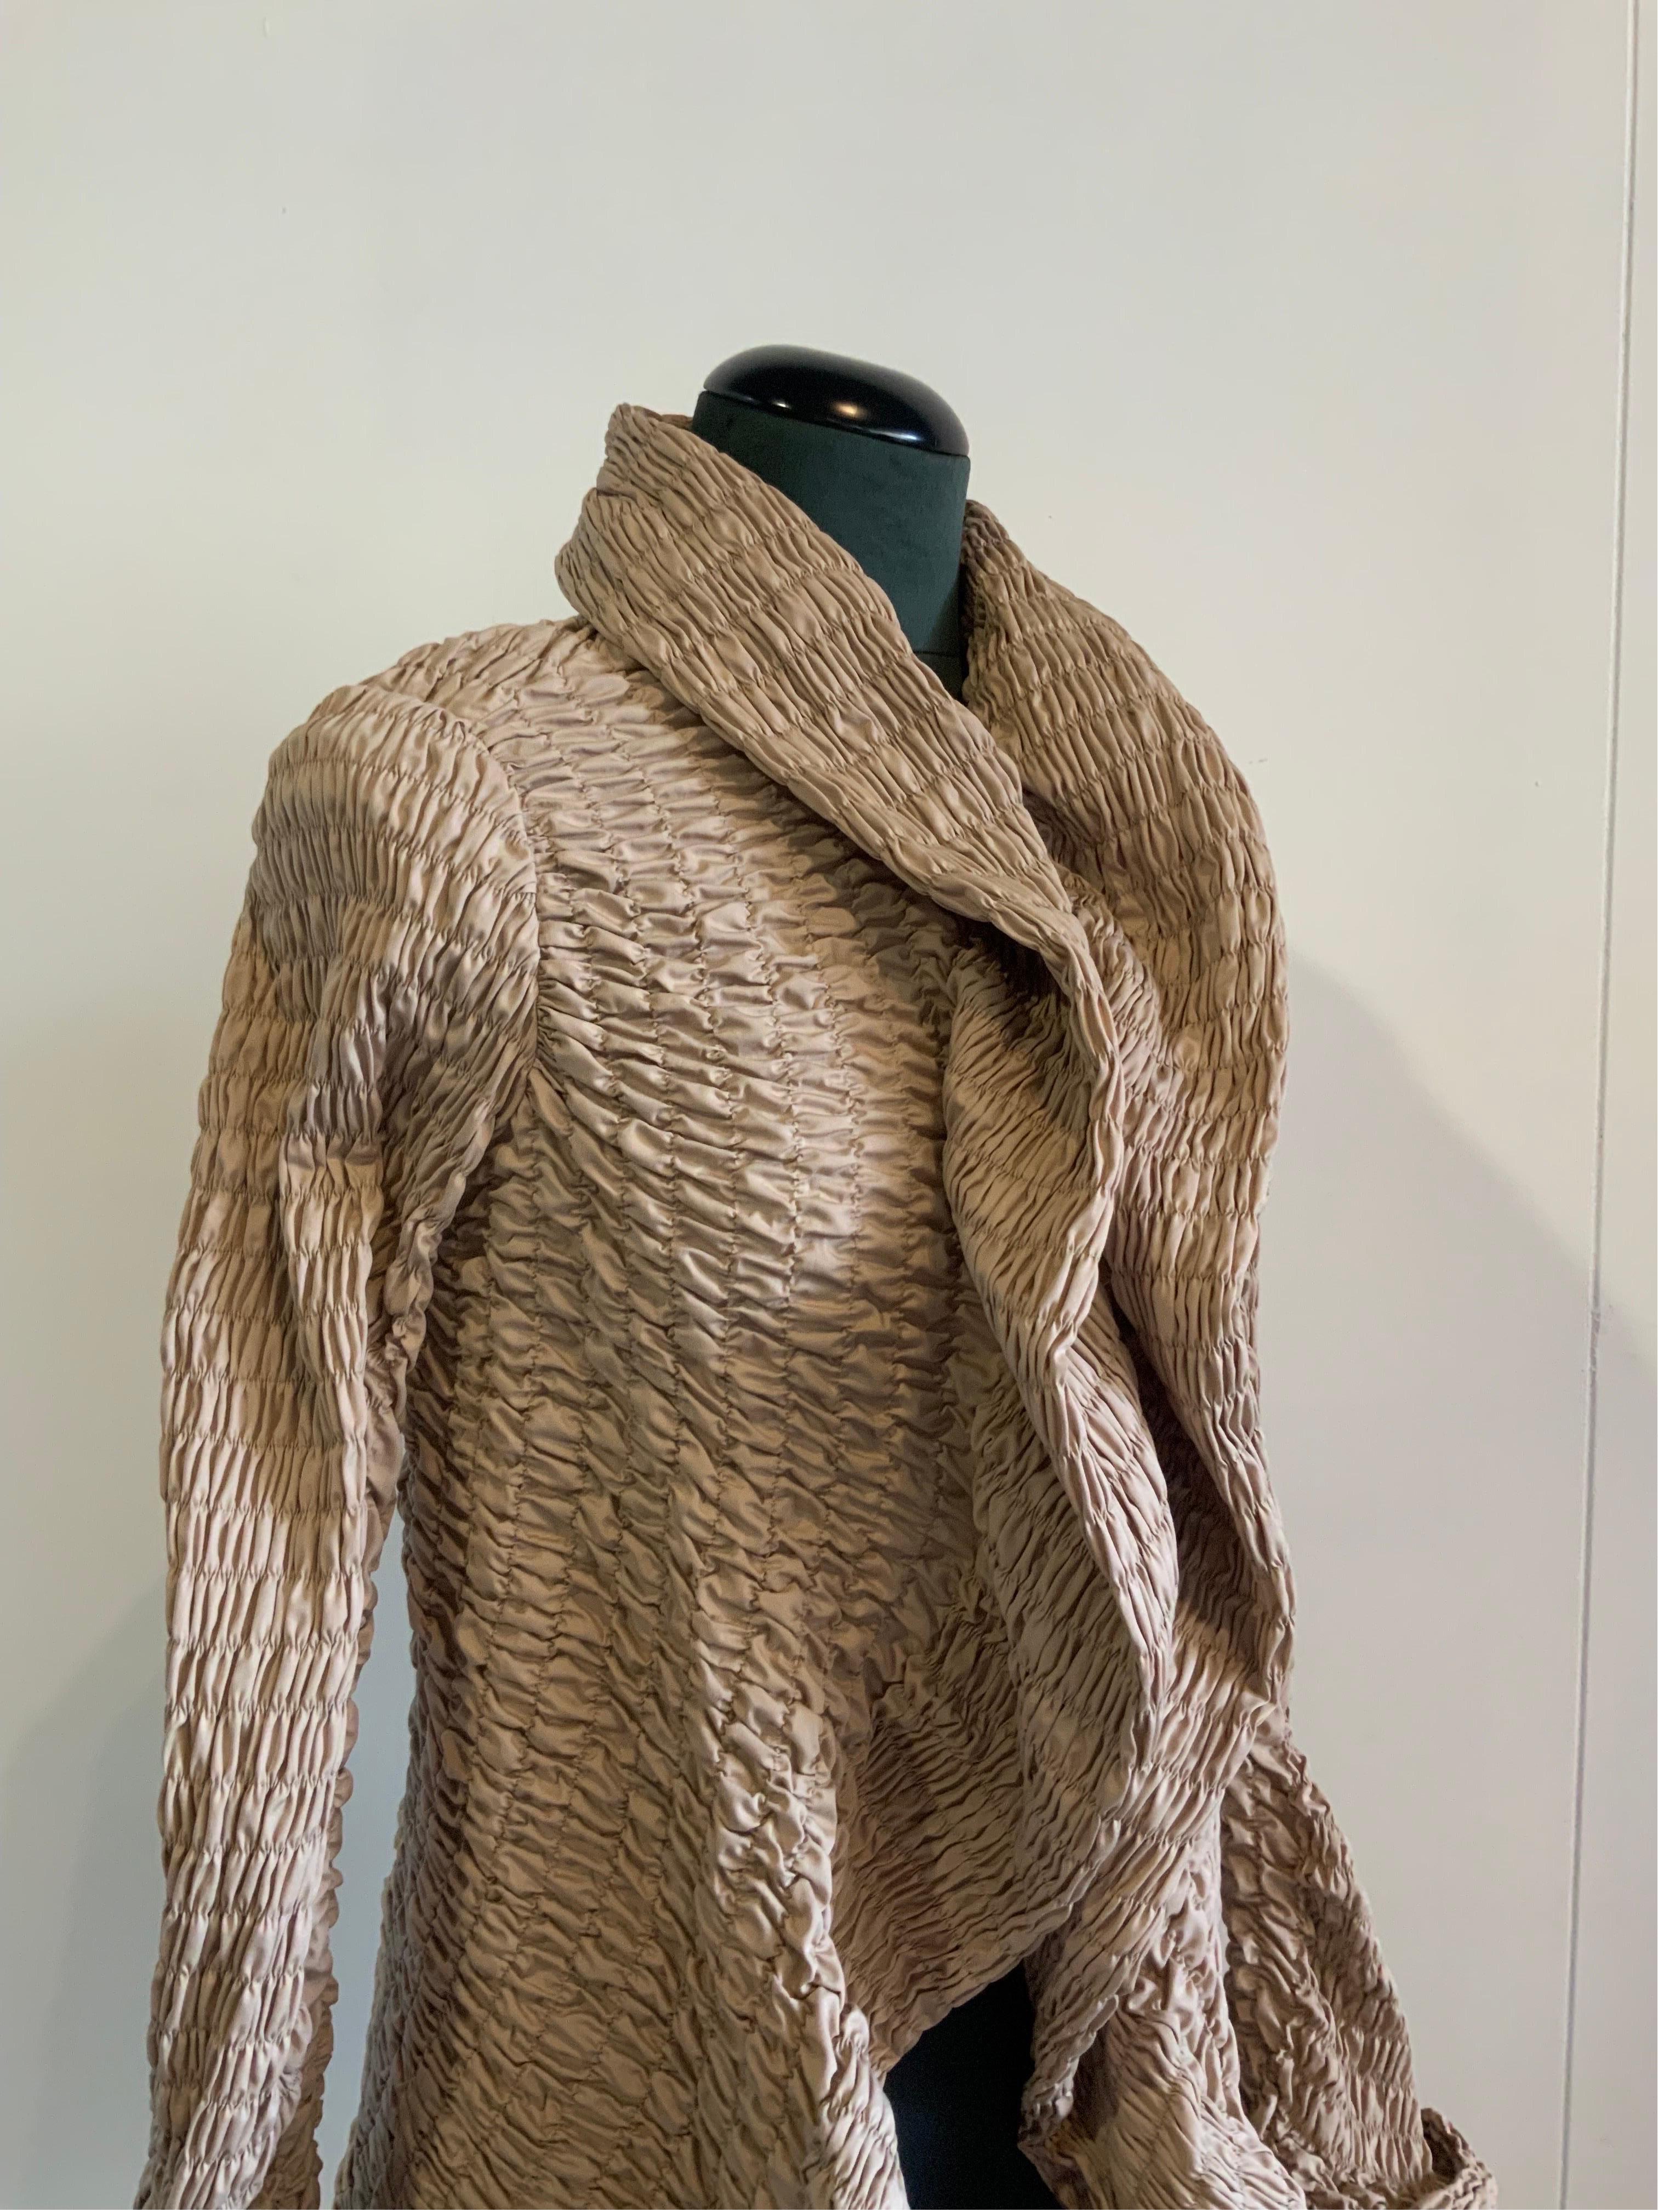 DRIES VAN NOTEN OUTERWEAR.
Made of 100% cotton. typical fabric of the brand.
Size S. Features 3 hooks for closure.
Measures:
Shoulders 40 cm
Bust 44 cm
Length 86 cm
Sleeve 80 cm
Excellent general condition, like new.
Very particular and elegant